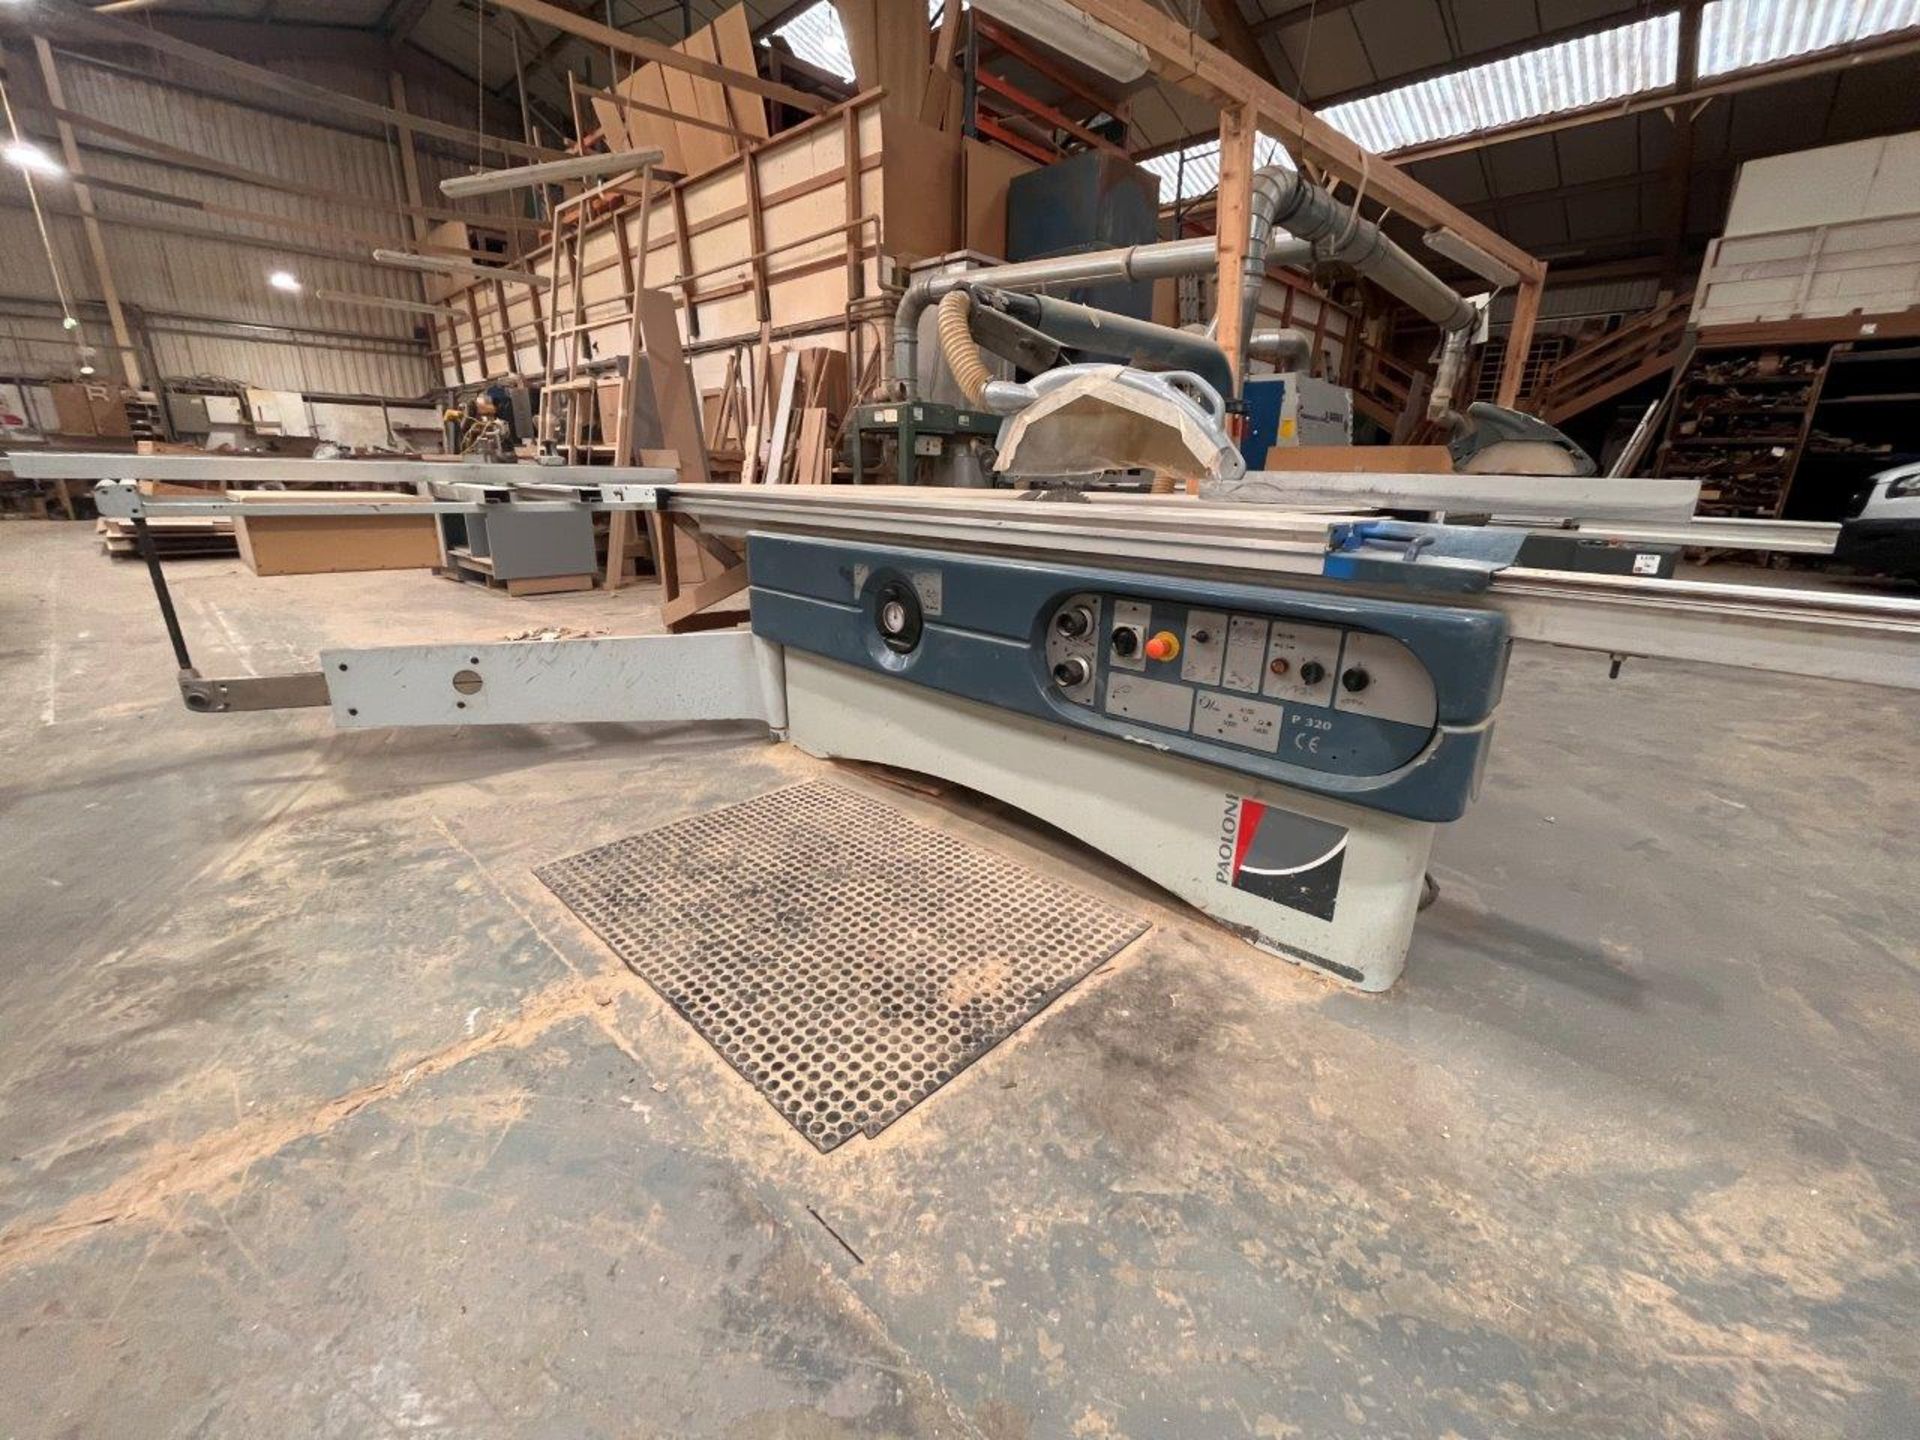 Paoloni P320 panel sizing saw, serial no. 0602 (1998)